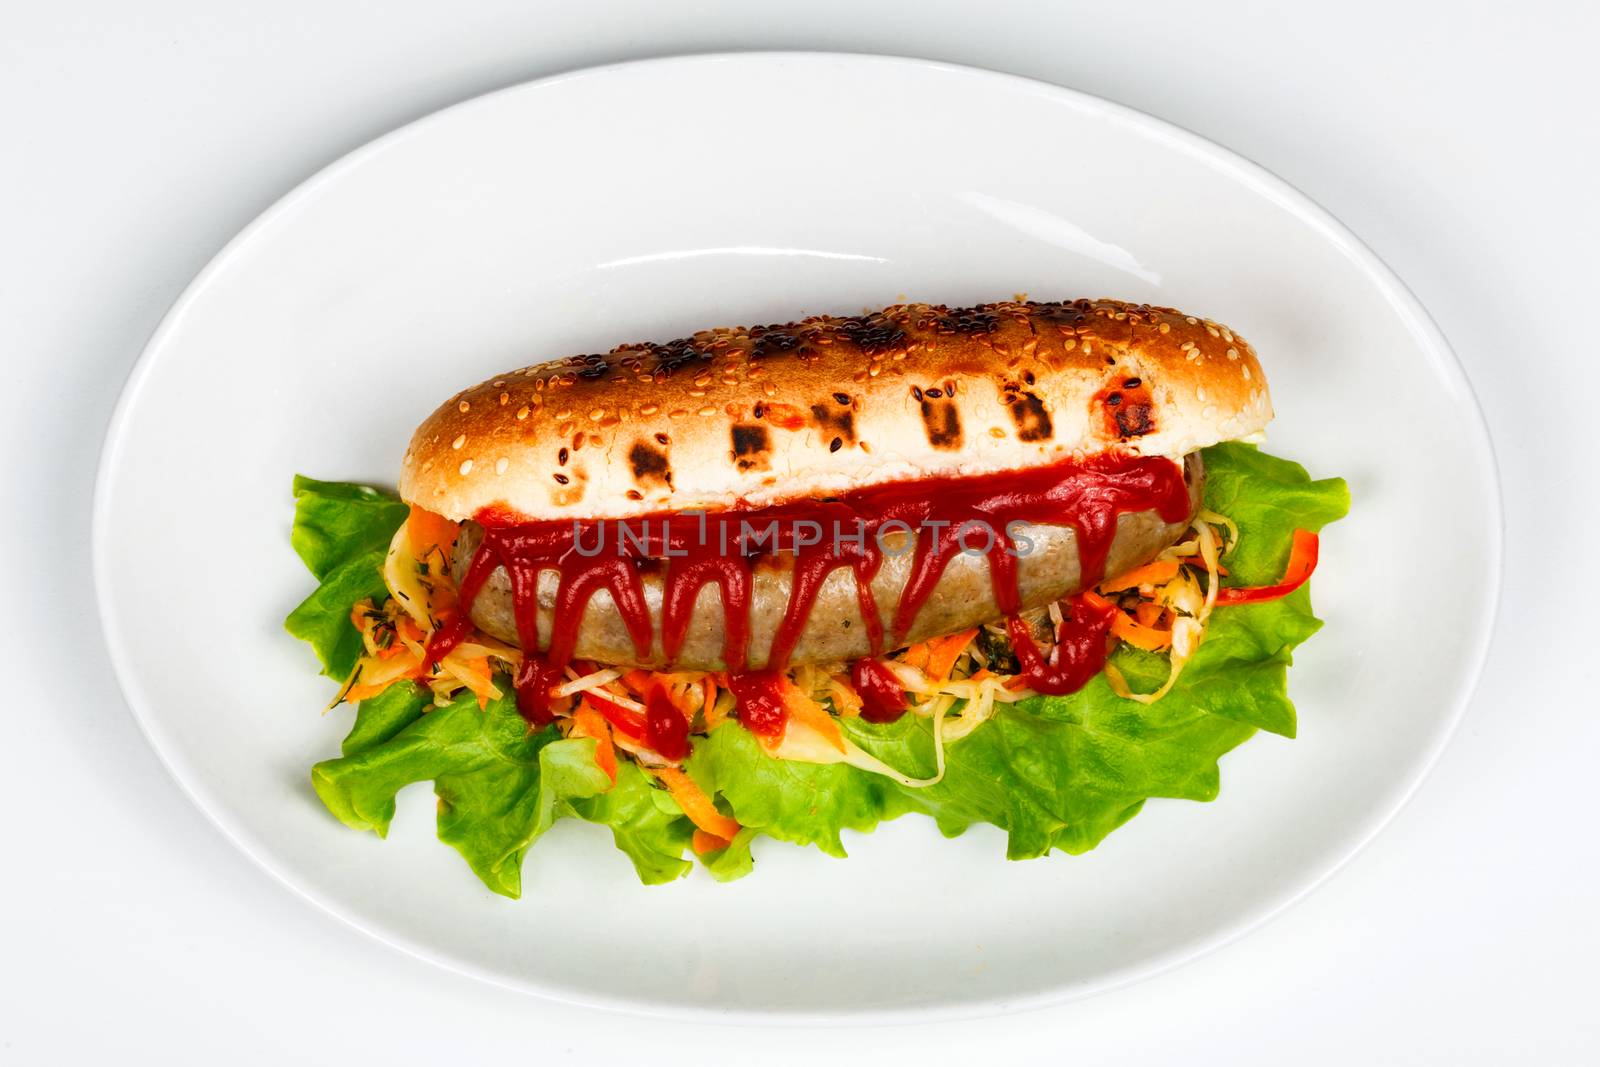 Closeup shot of a hot dog on a plate by Nobilior